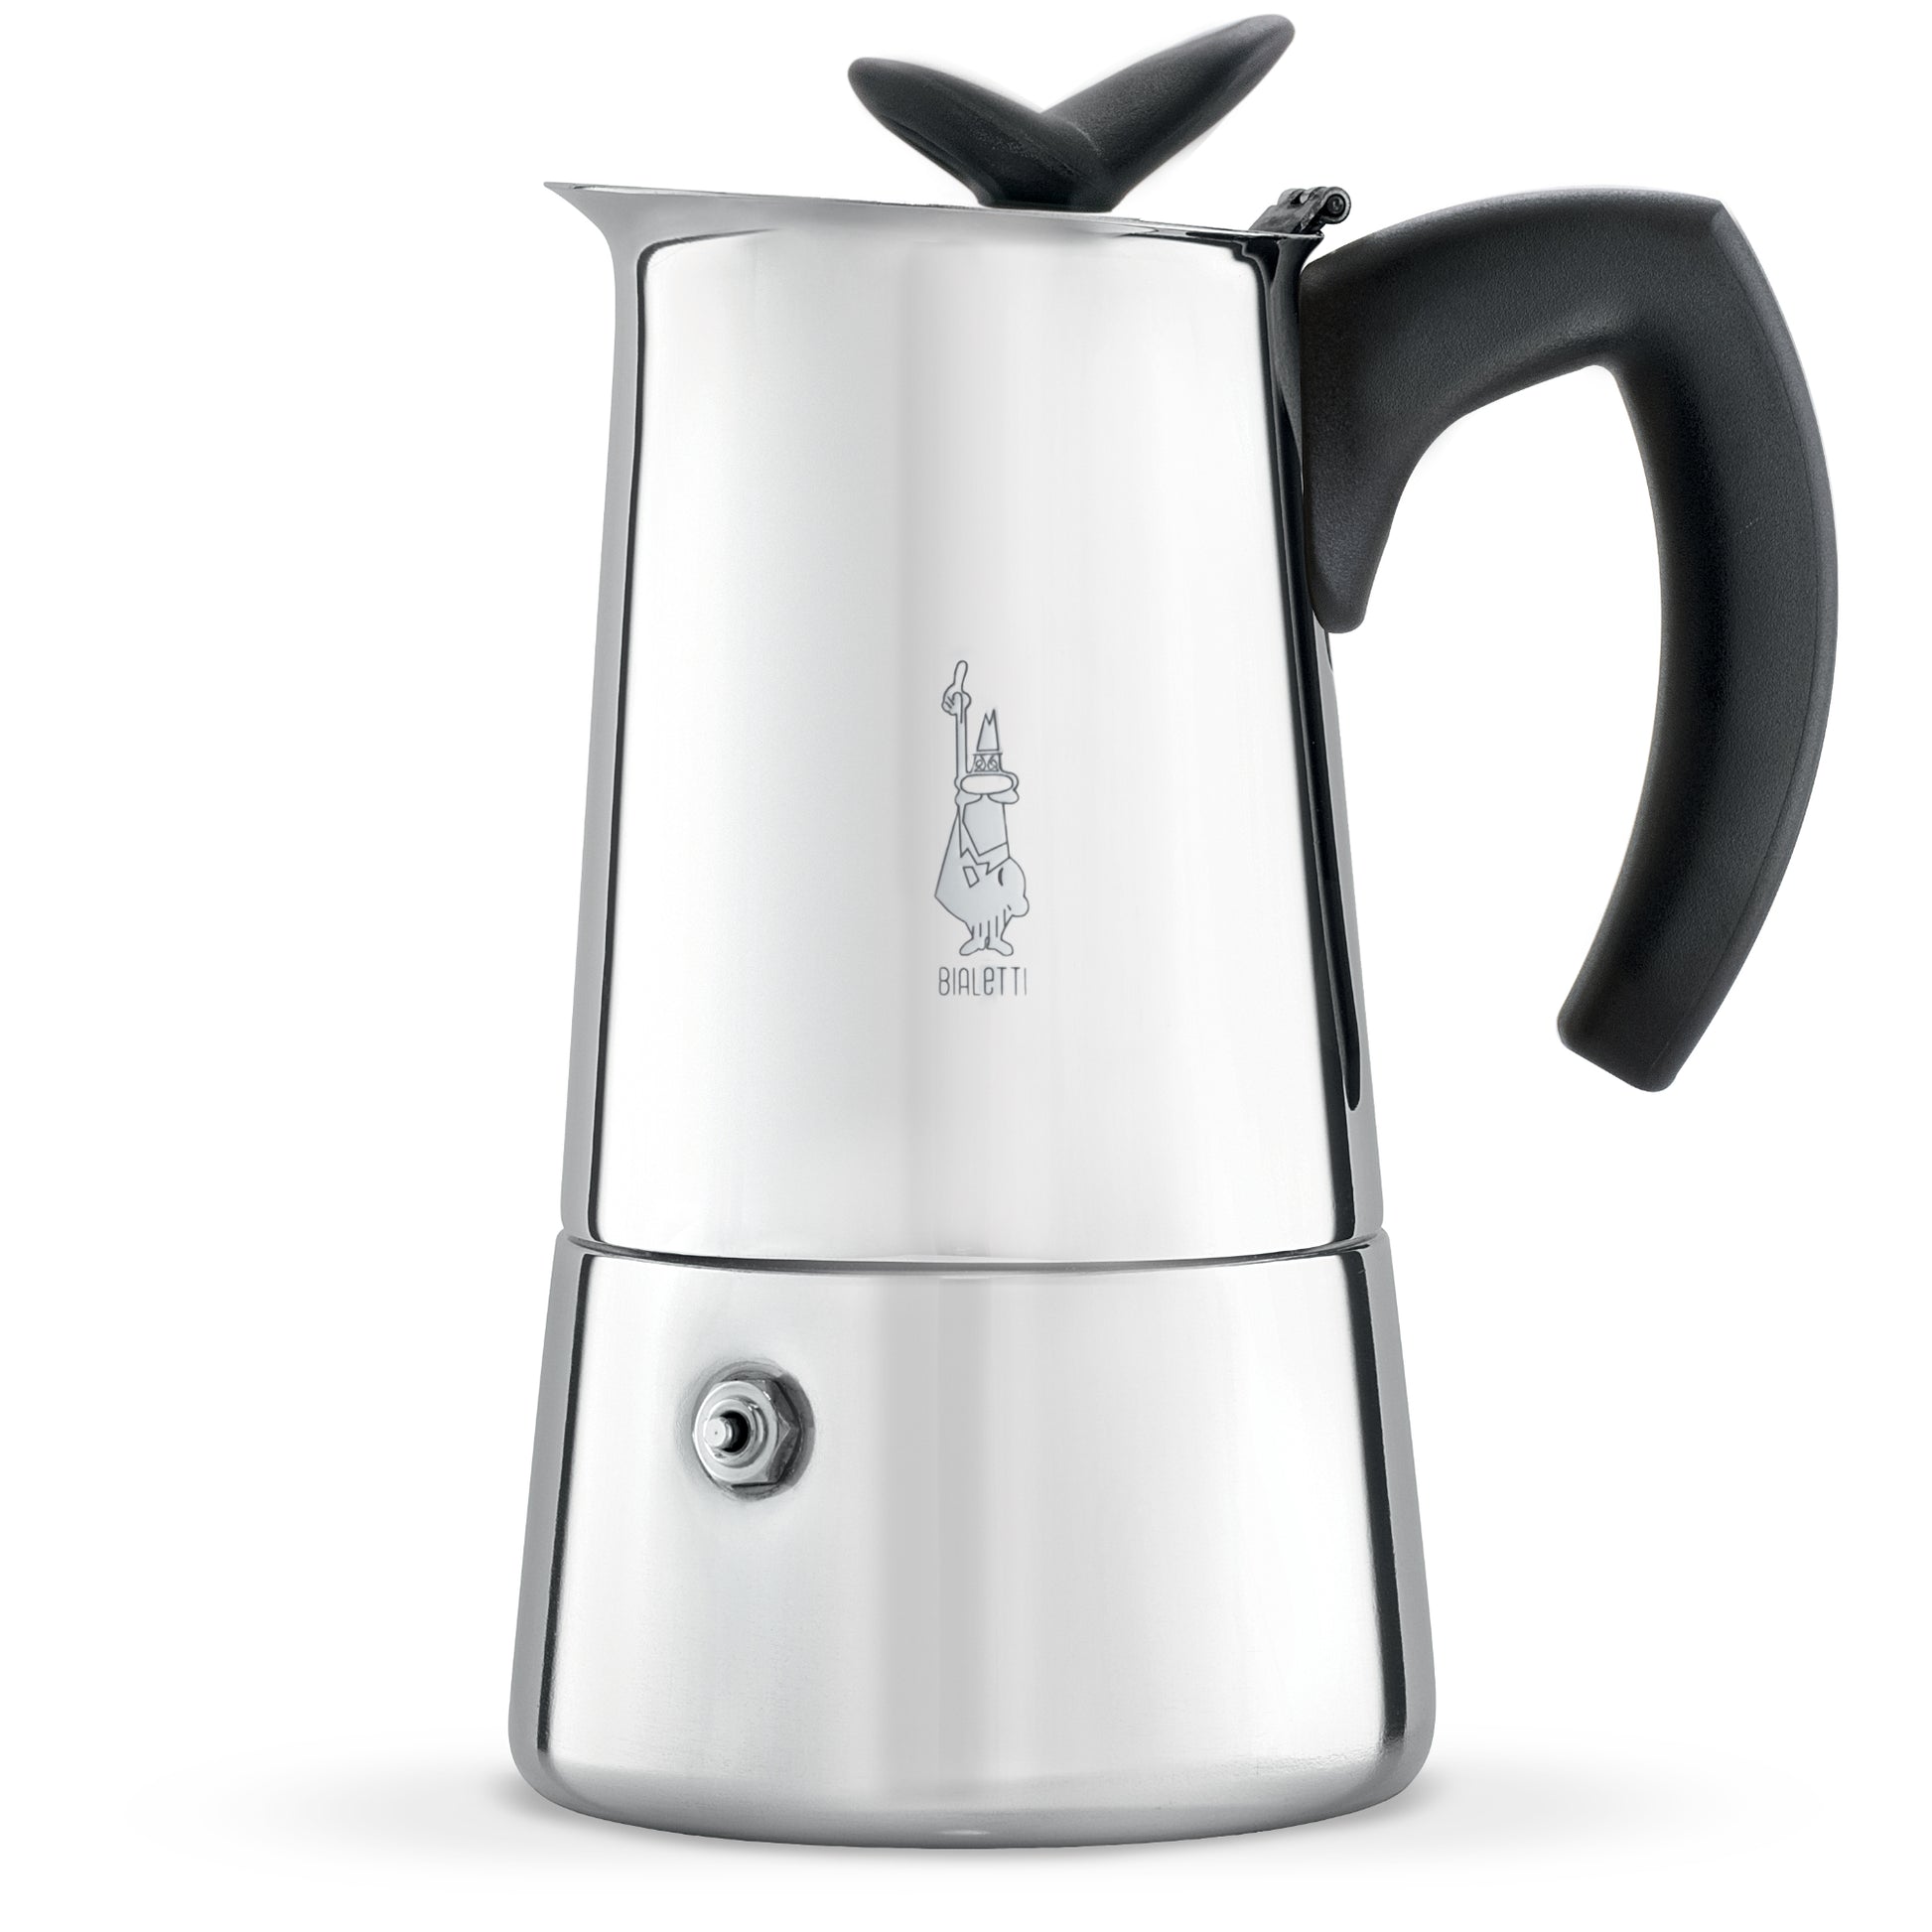 Bialetti 6-Cup Stovetop, Coffee Equipment